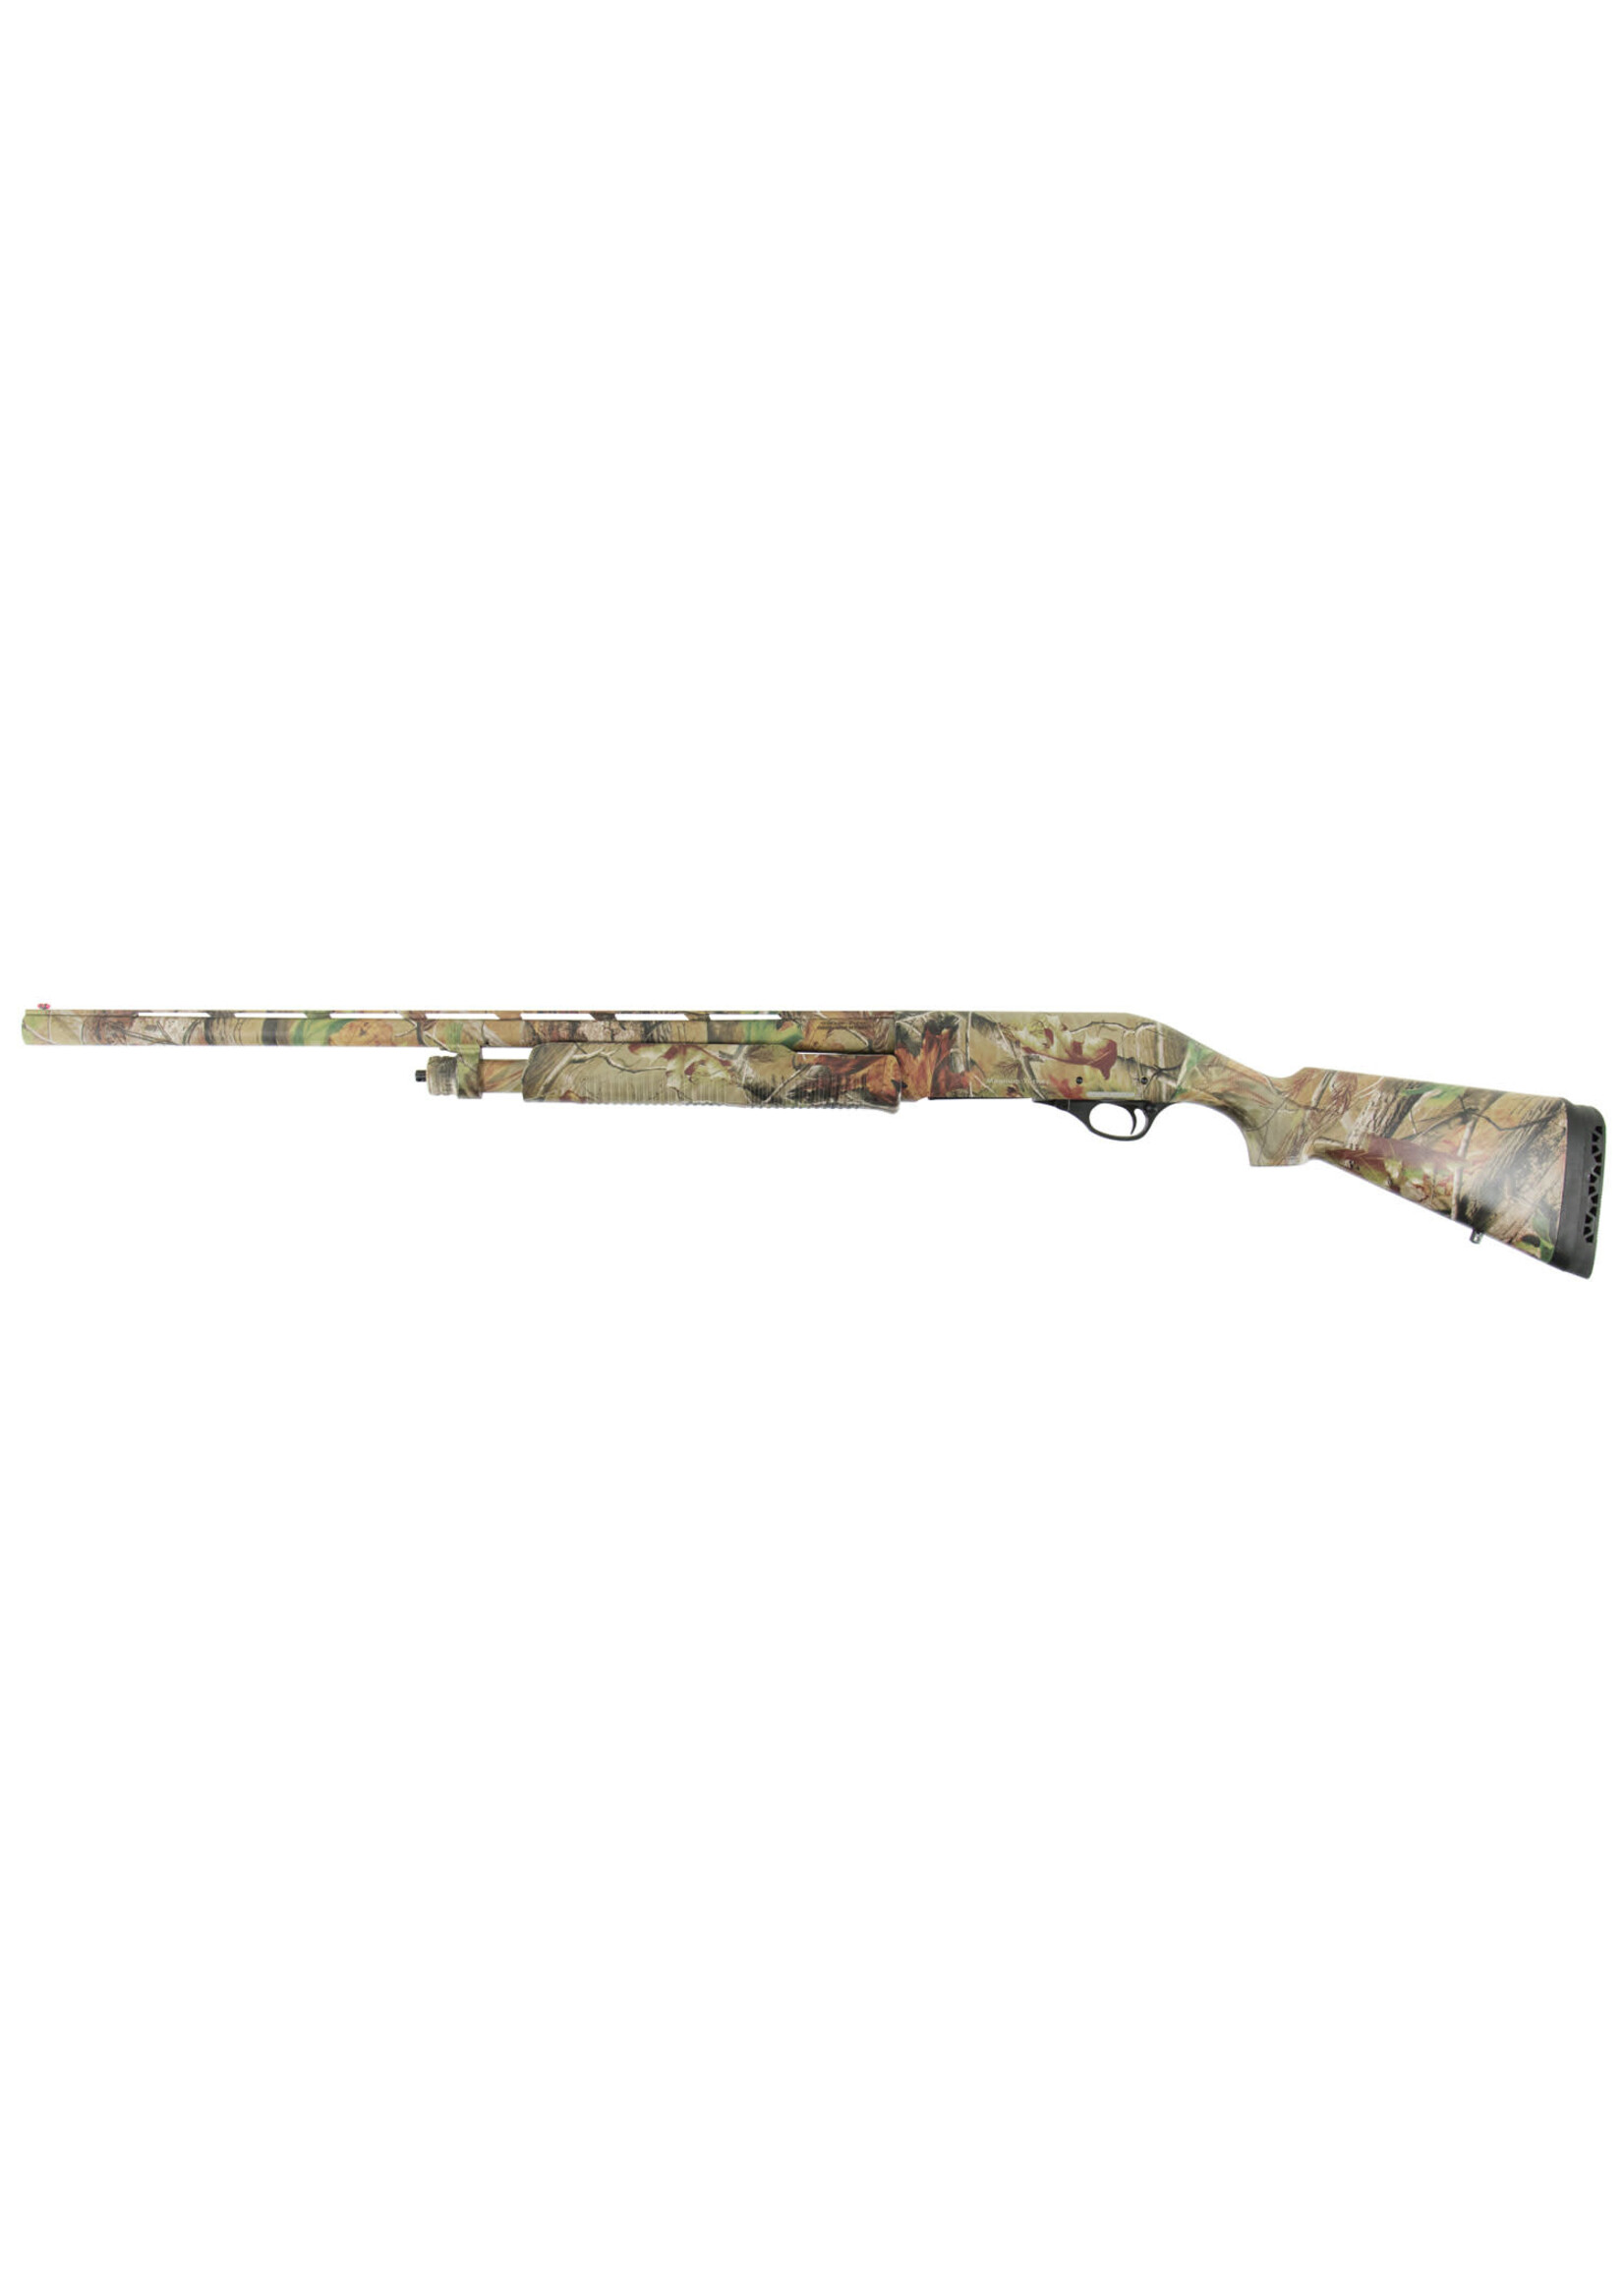 CZ USA CZ-USA 06533 CZ 612 Magnum Turkey 12 Gauge with 26" Barrel, 3.5" Chamber, 4+1 Capacity, Overall Hydrodipped Realtree AP Camo Finish & Synthetic Stock Right Hand (Full Size) Includes 2 Chokes